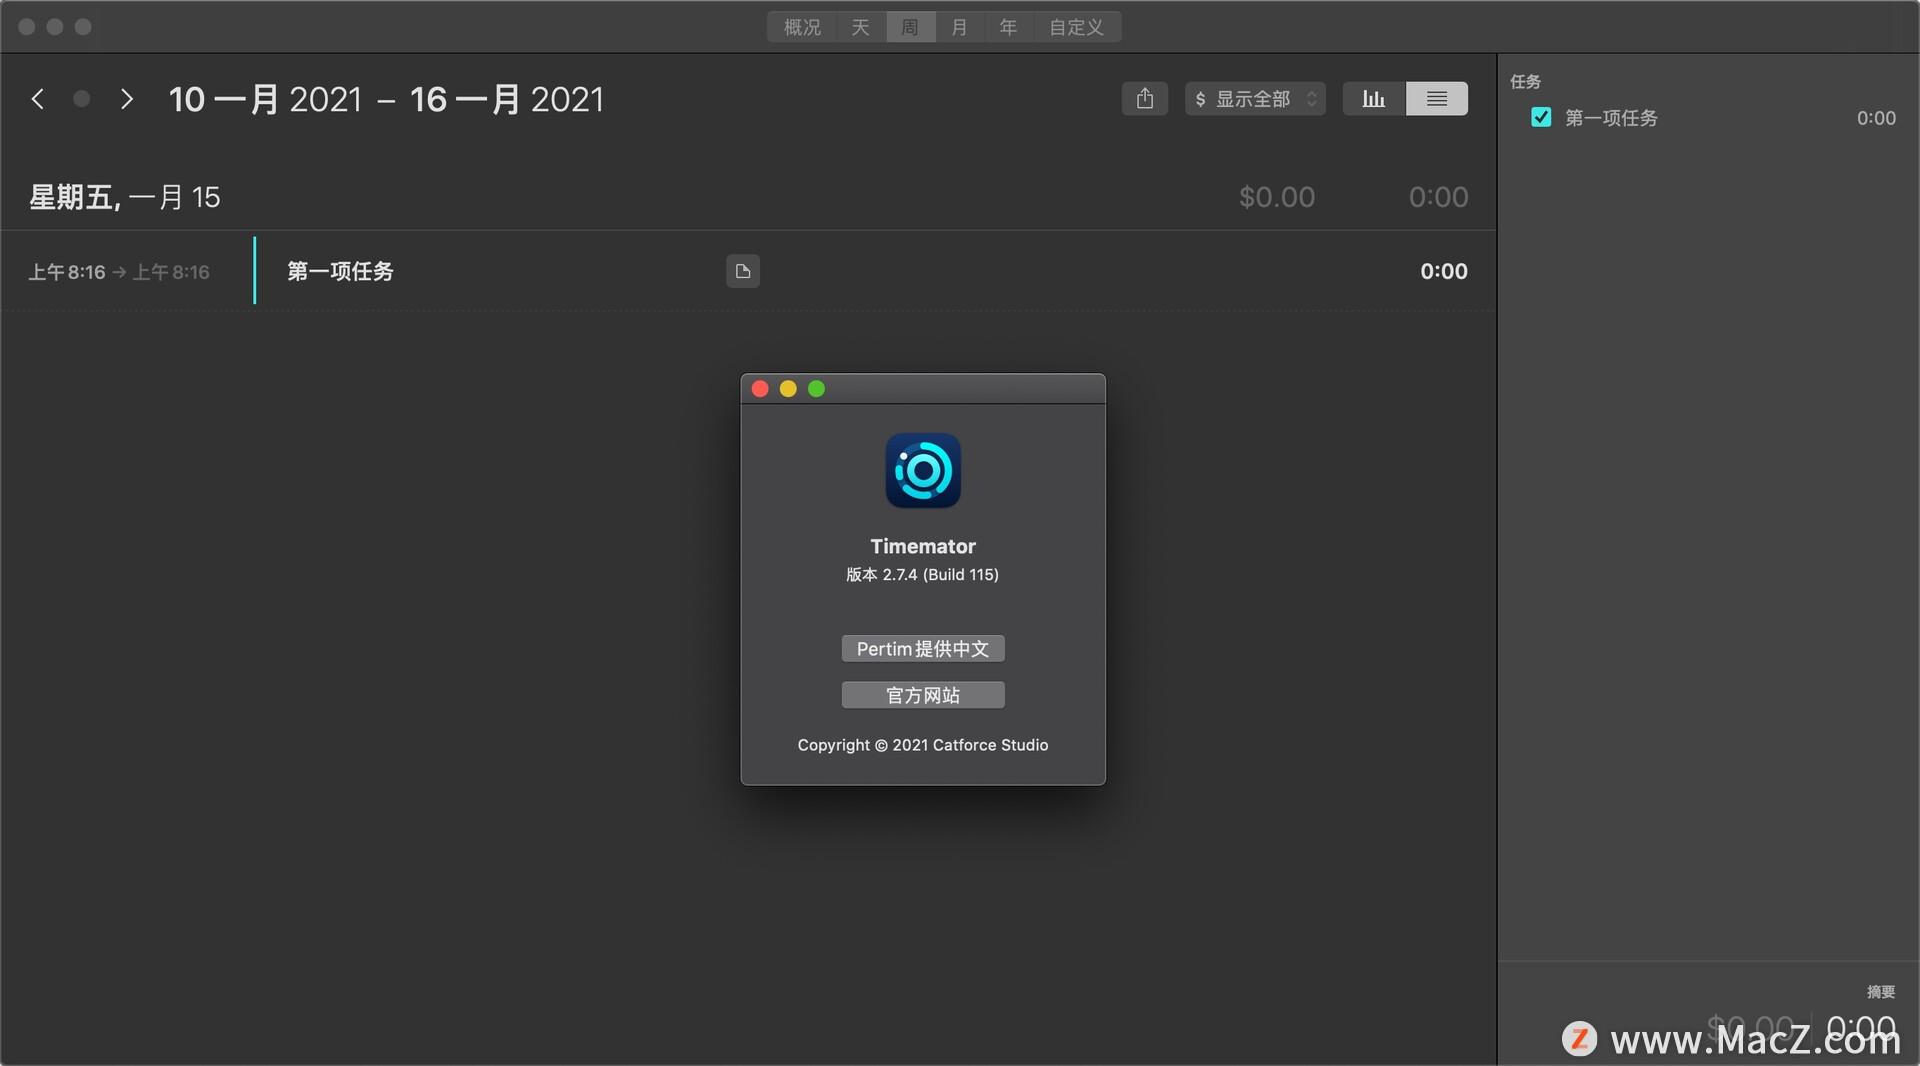 Timemator download the new for mac